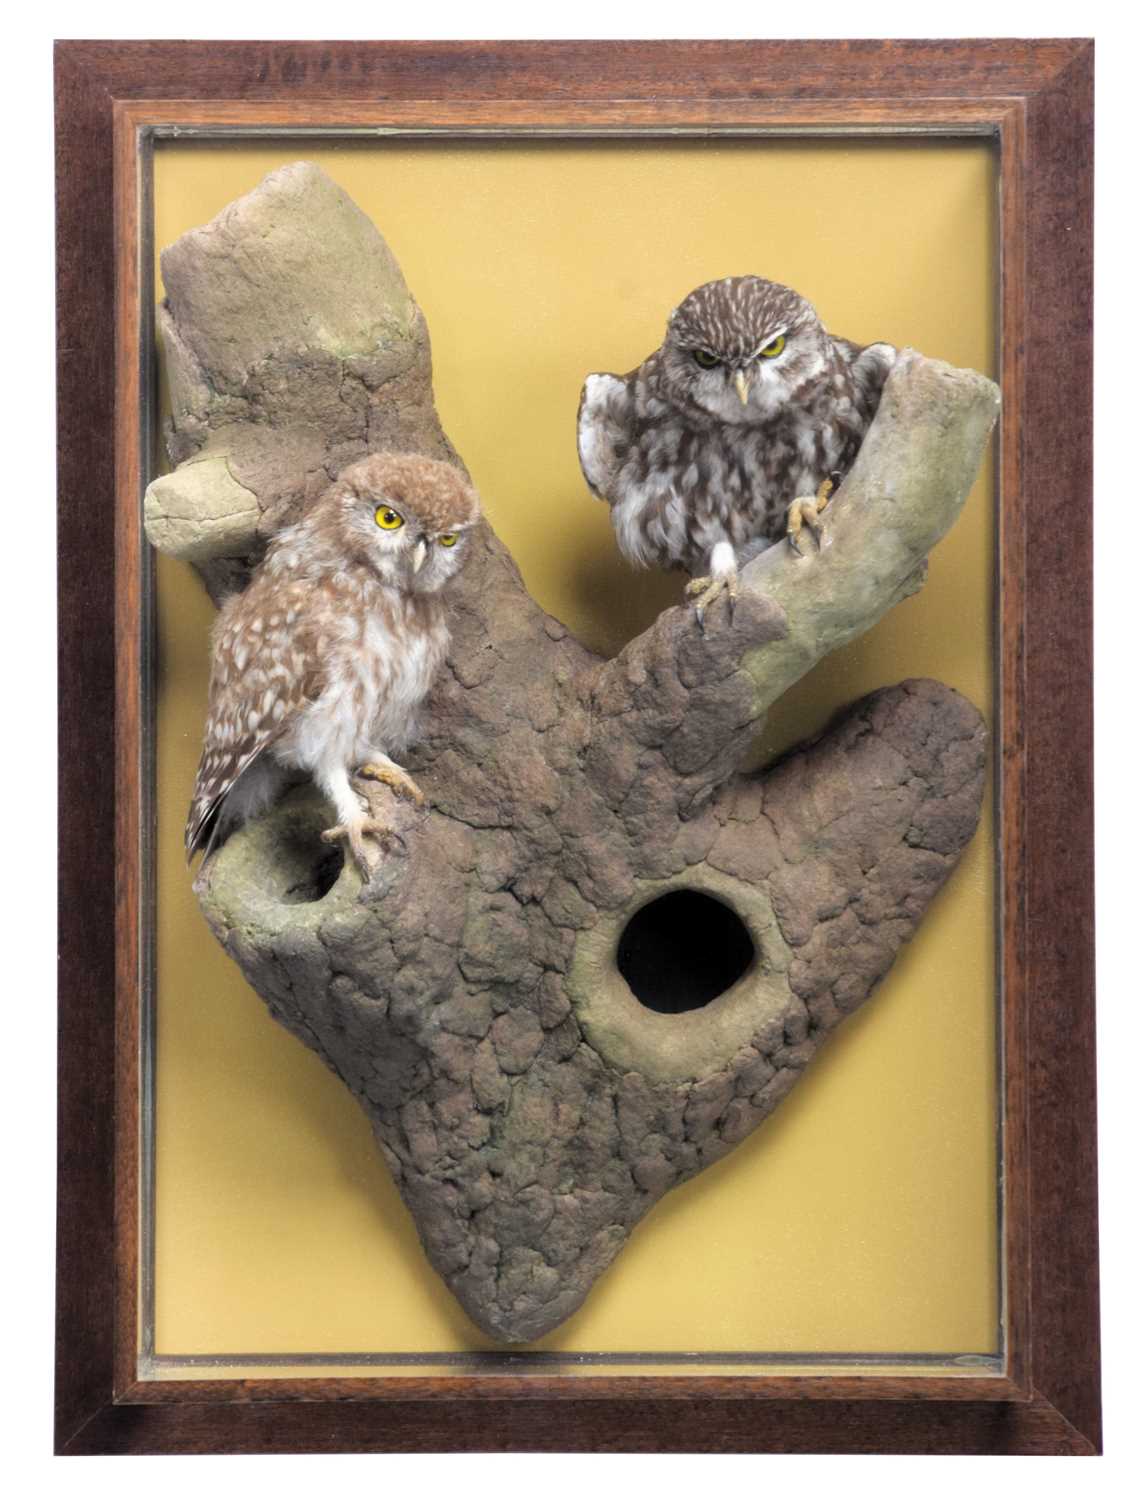 Taxidermy: A Wall Cased Pair of European Little Owl's (Athene noctua), dated 1982, by David